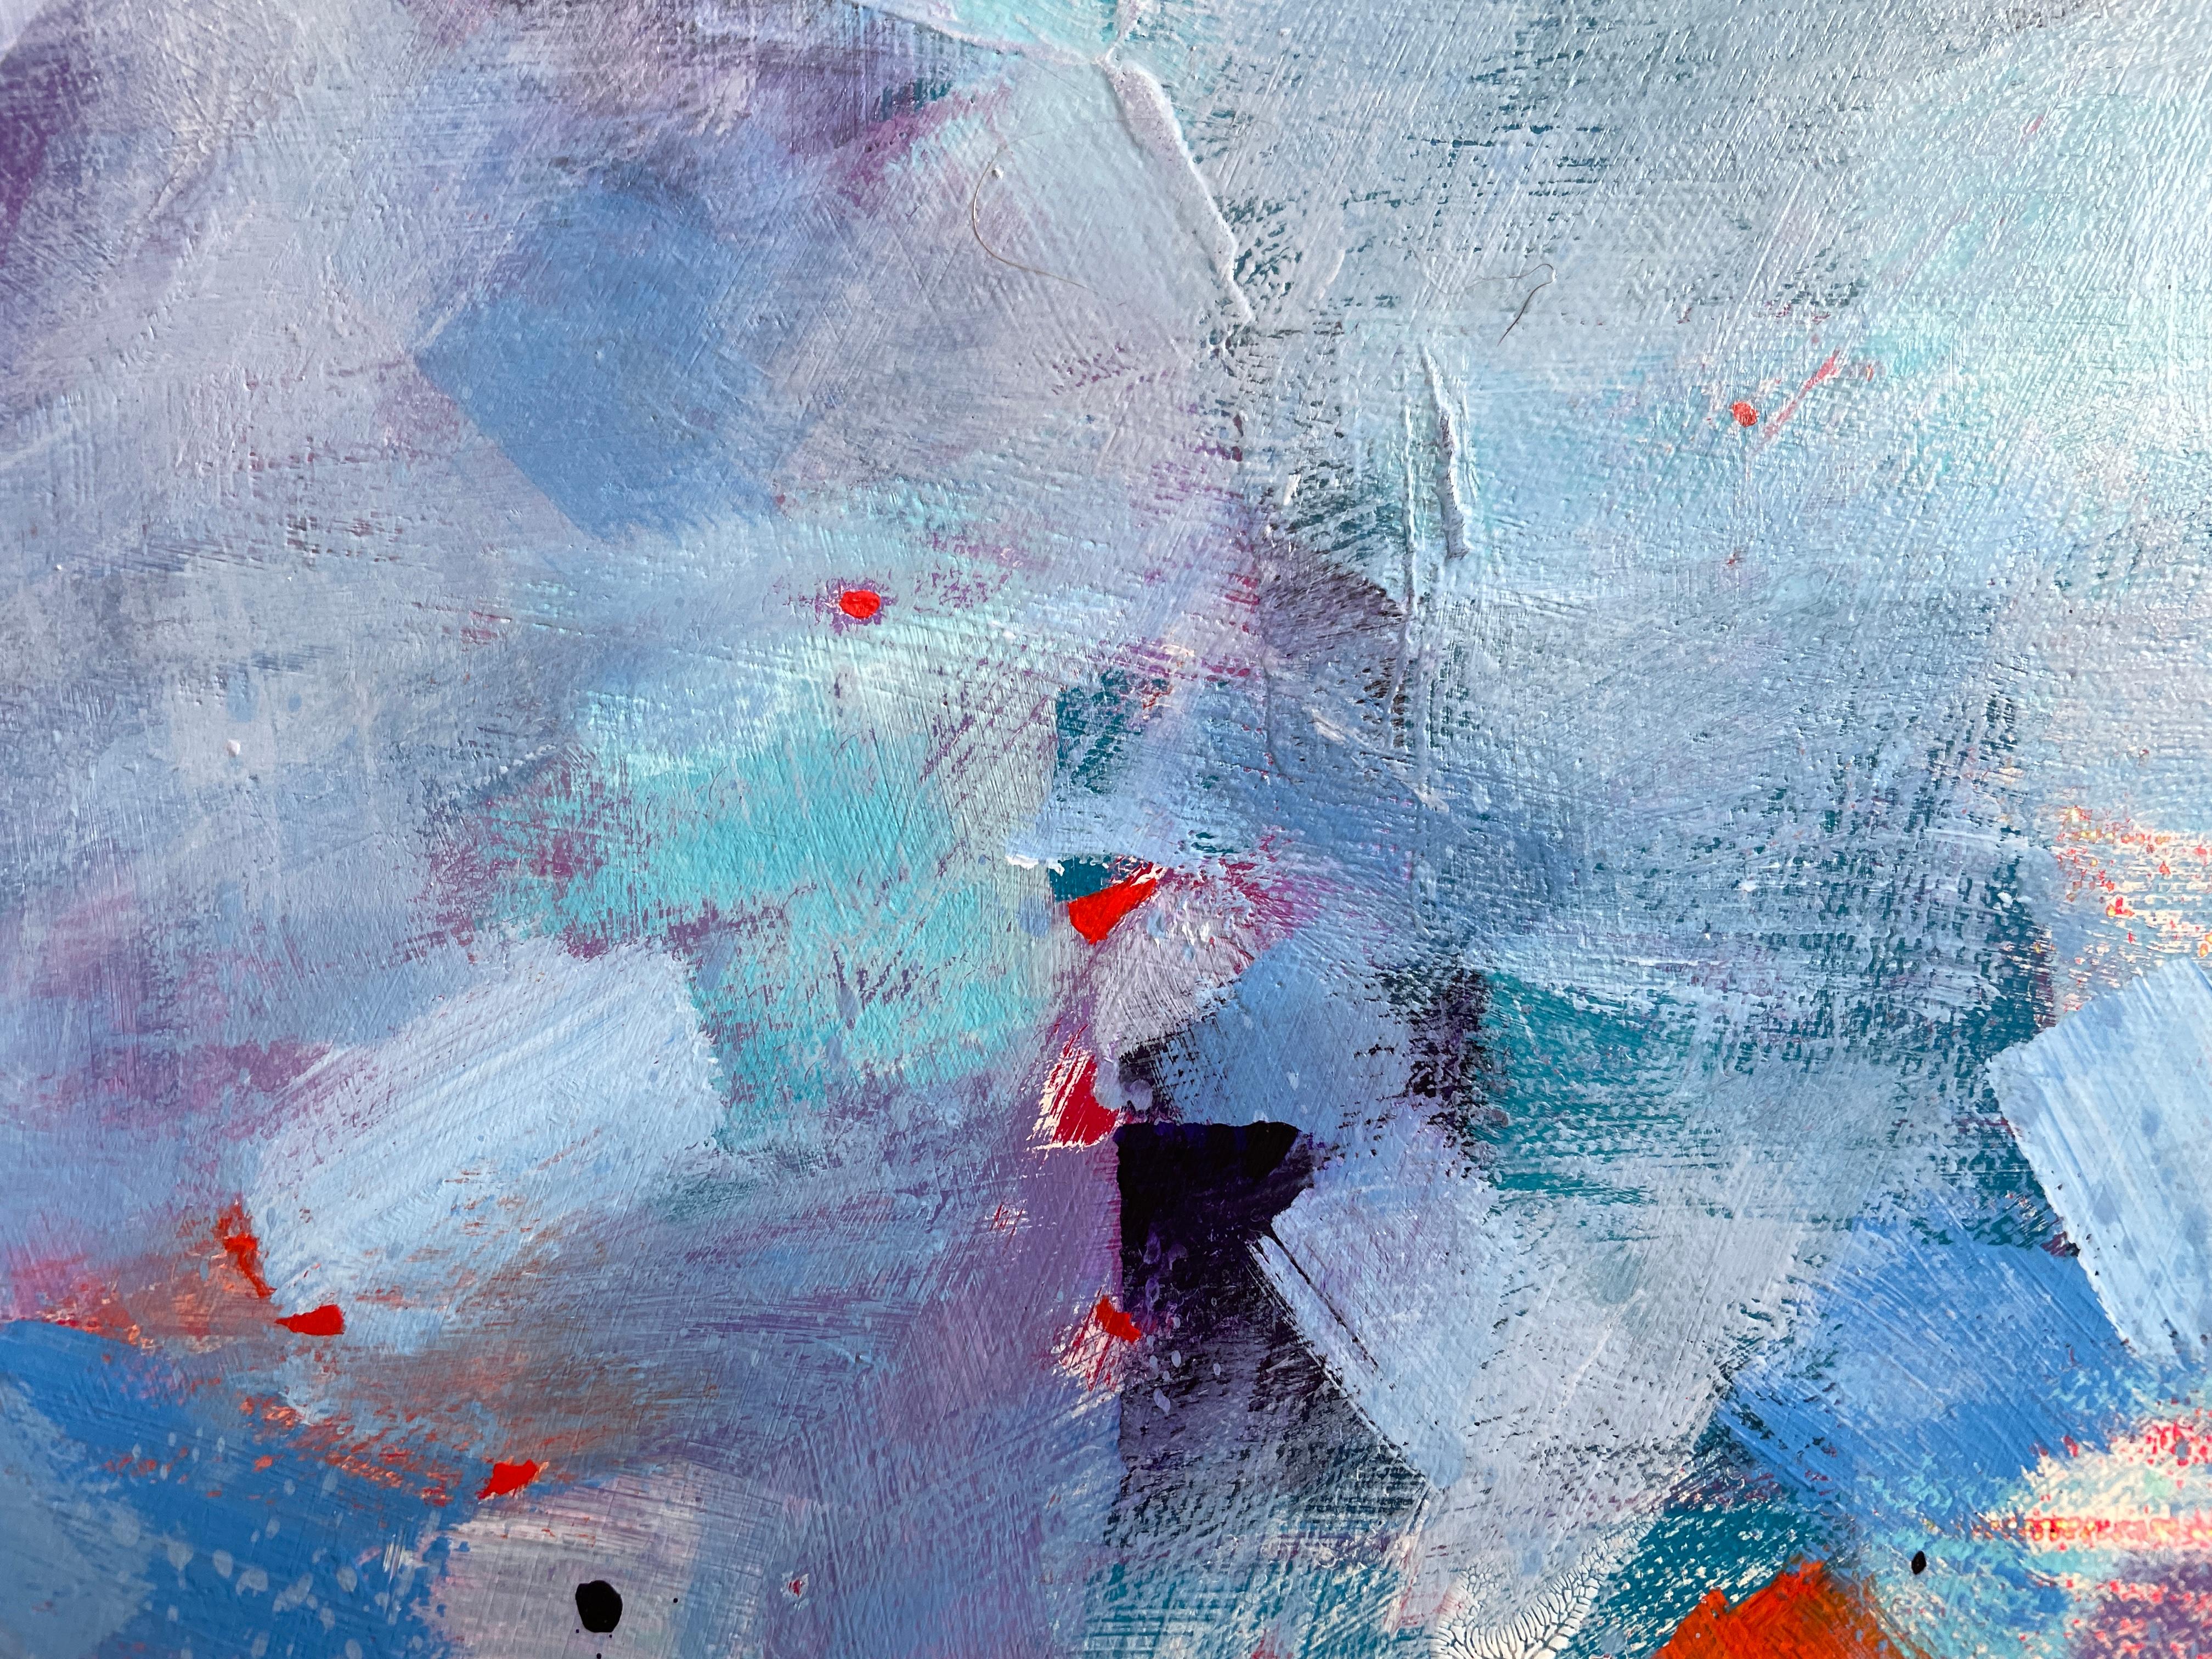 'Revelation' - Blue and Red - Small Contemporary Abstract Expressionism - Abstract Expressionist Painting by Maria Poroy